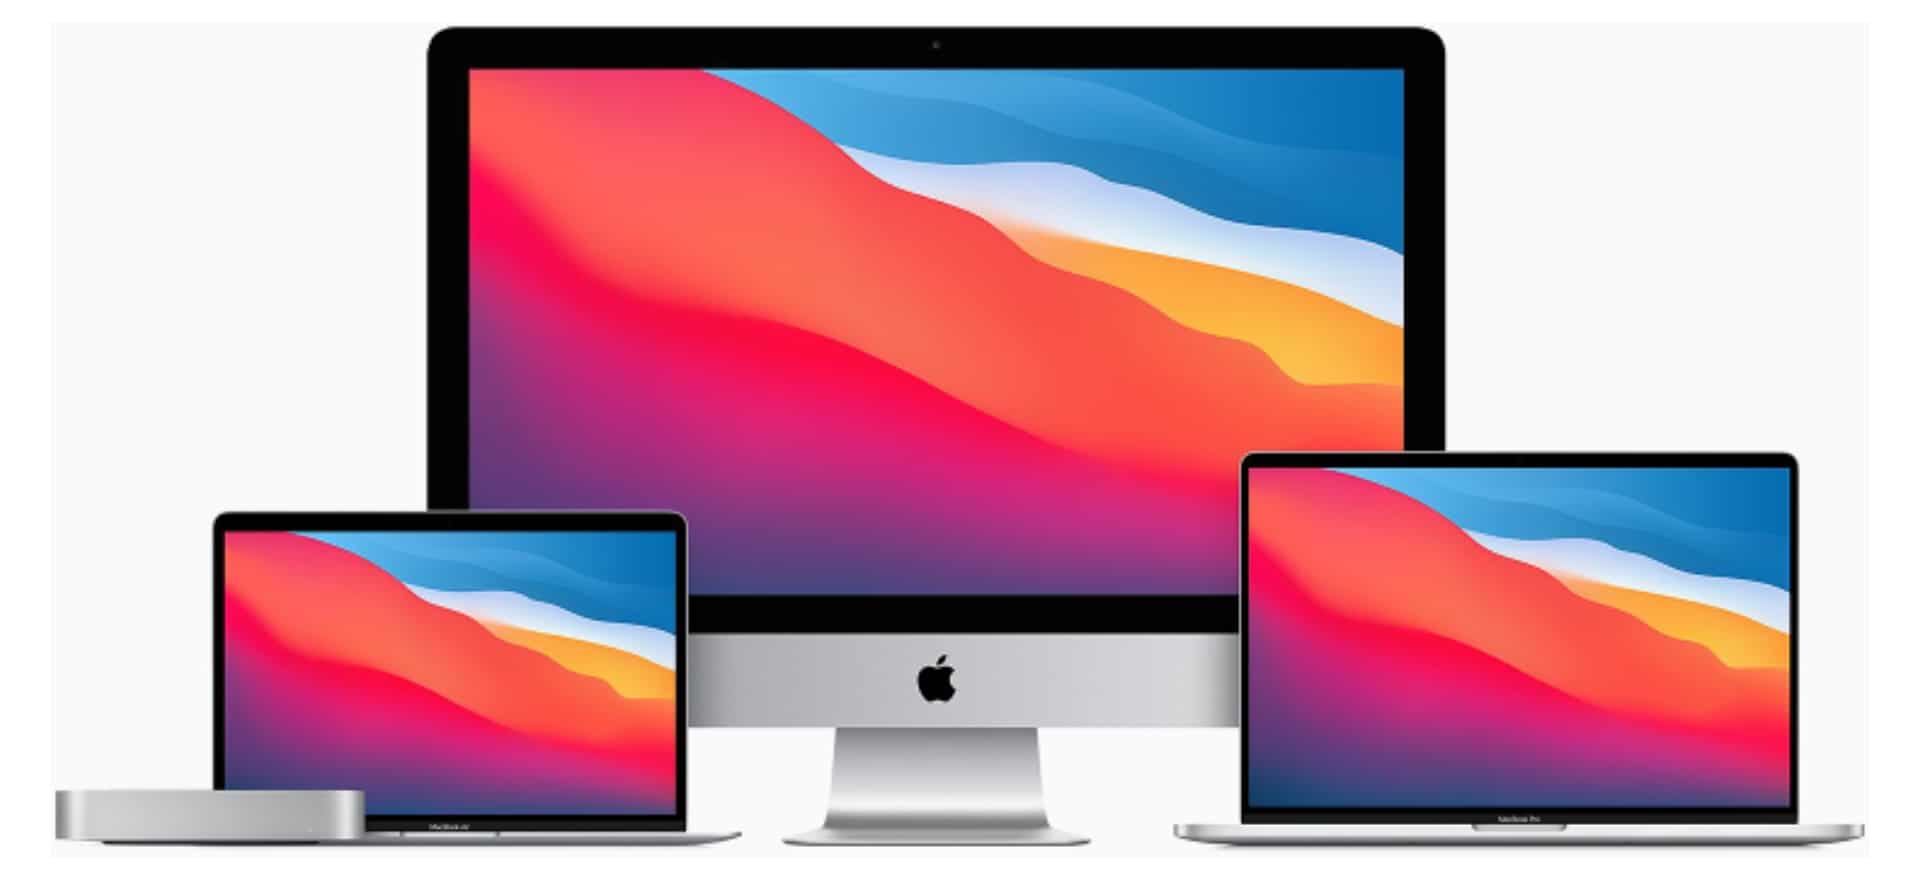 Apple is Reportedly Discontinuing the iMac Pro, Selling Only The Existing Stock